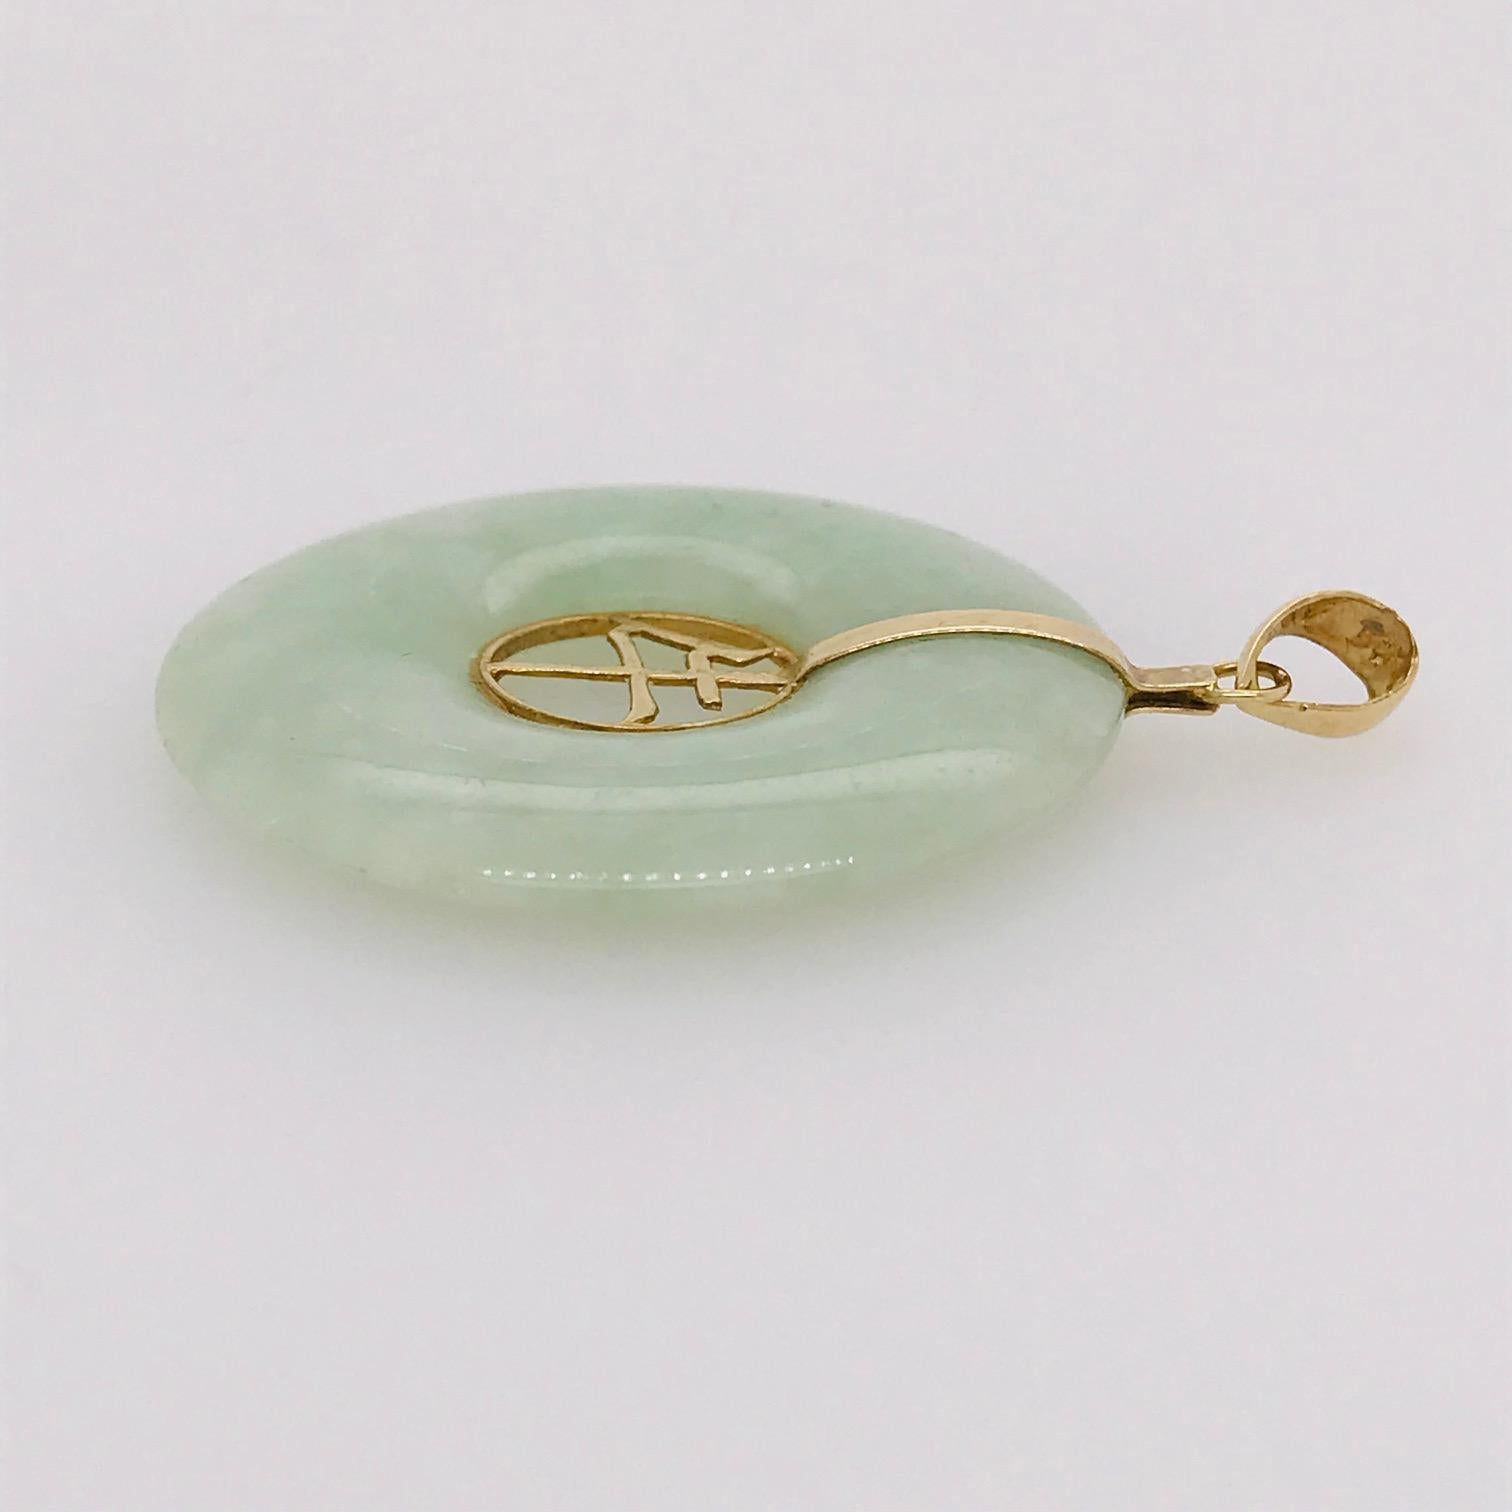 Neoclassical Fortune Chinese Jade Pi 'Disk' Pendant in 14 Karat Gold, Neolithic Design